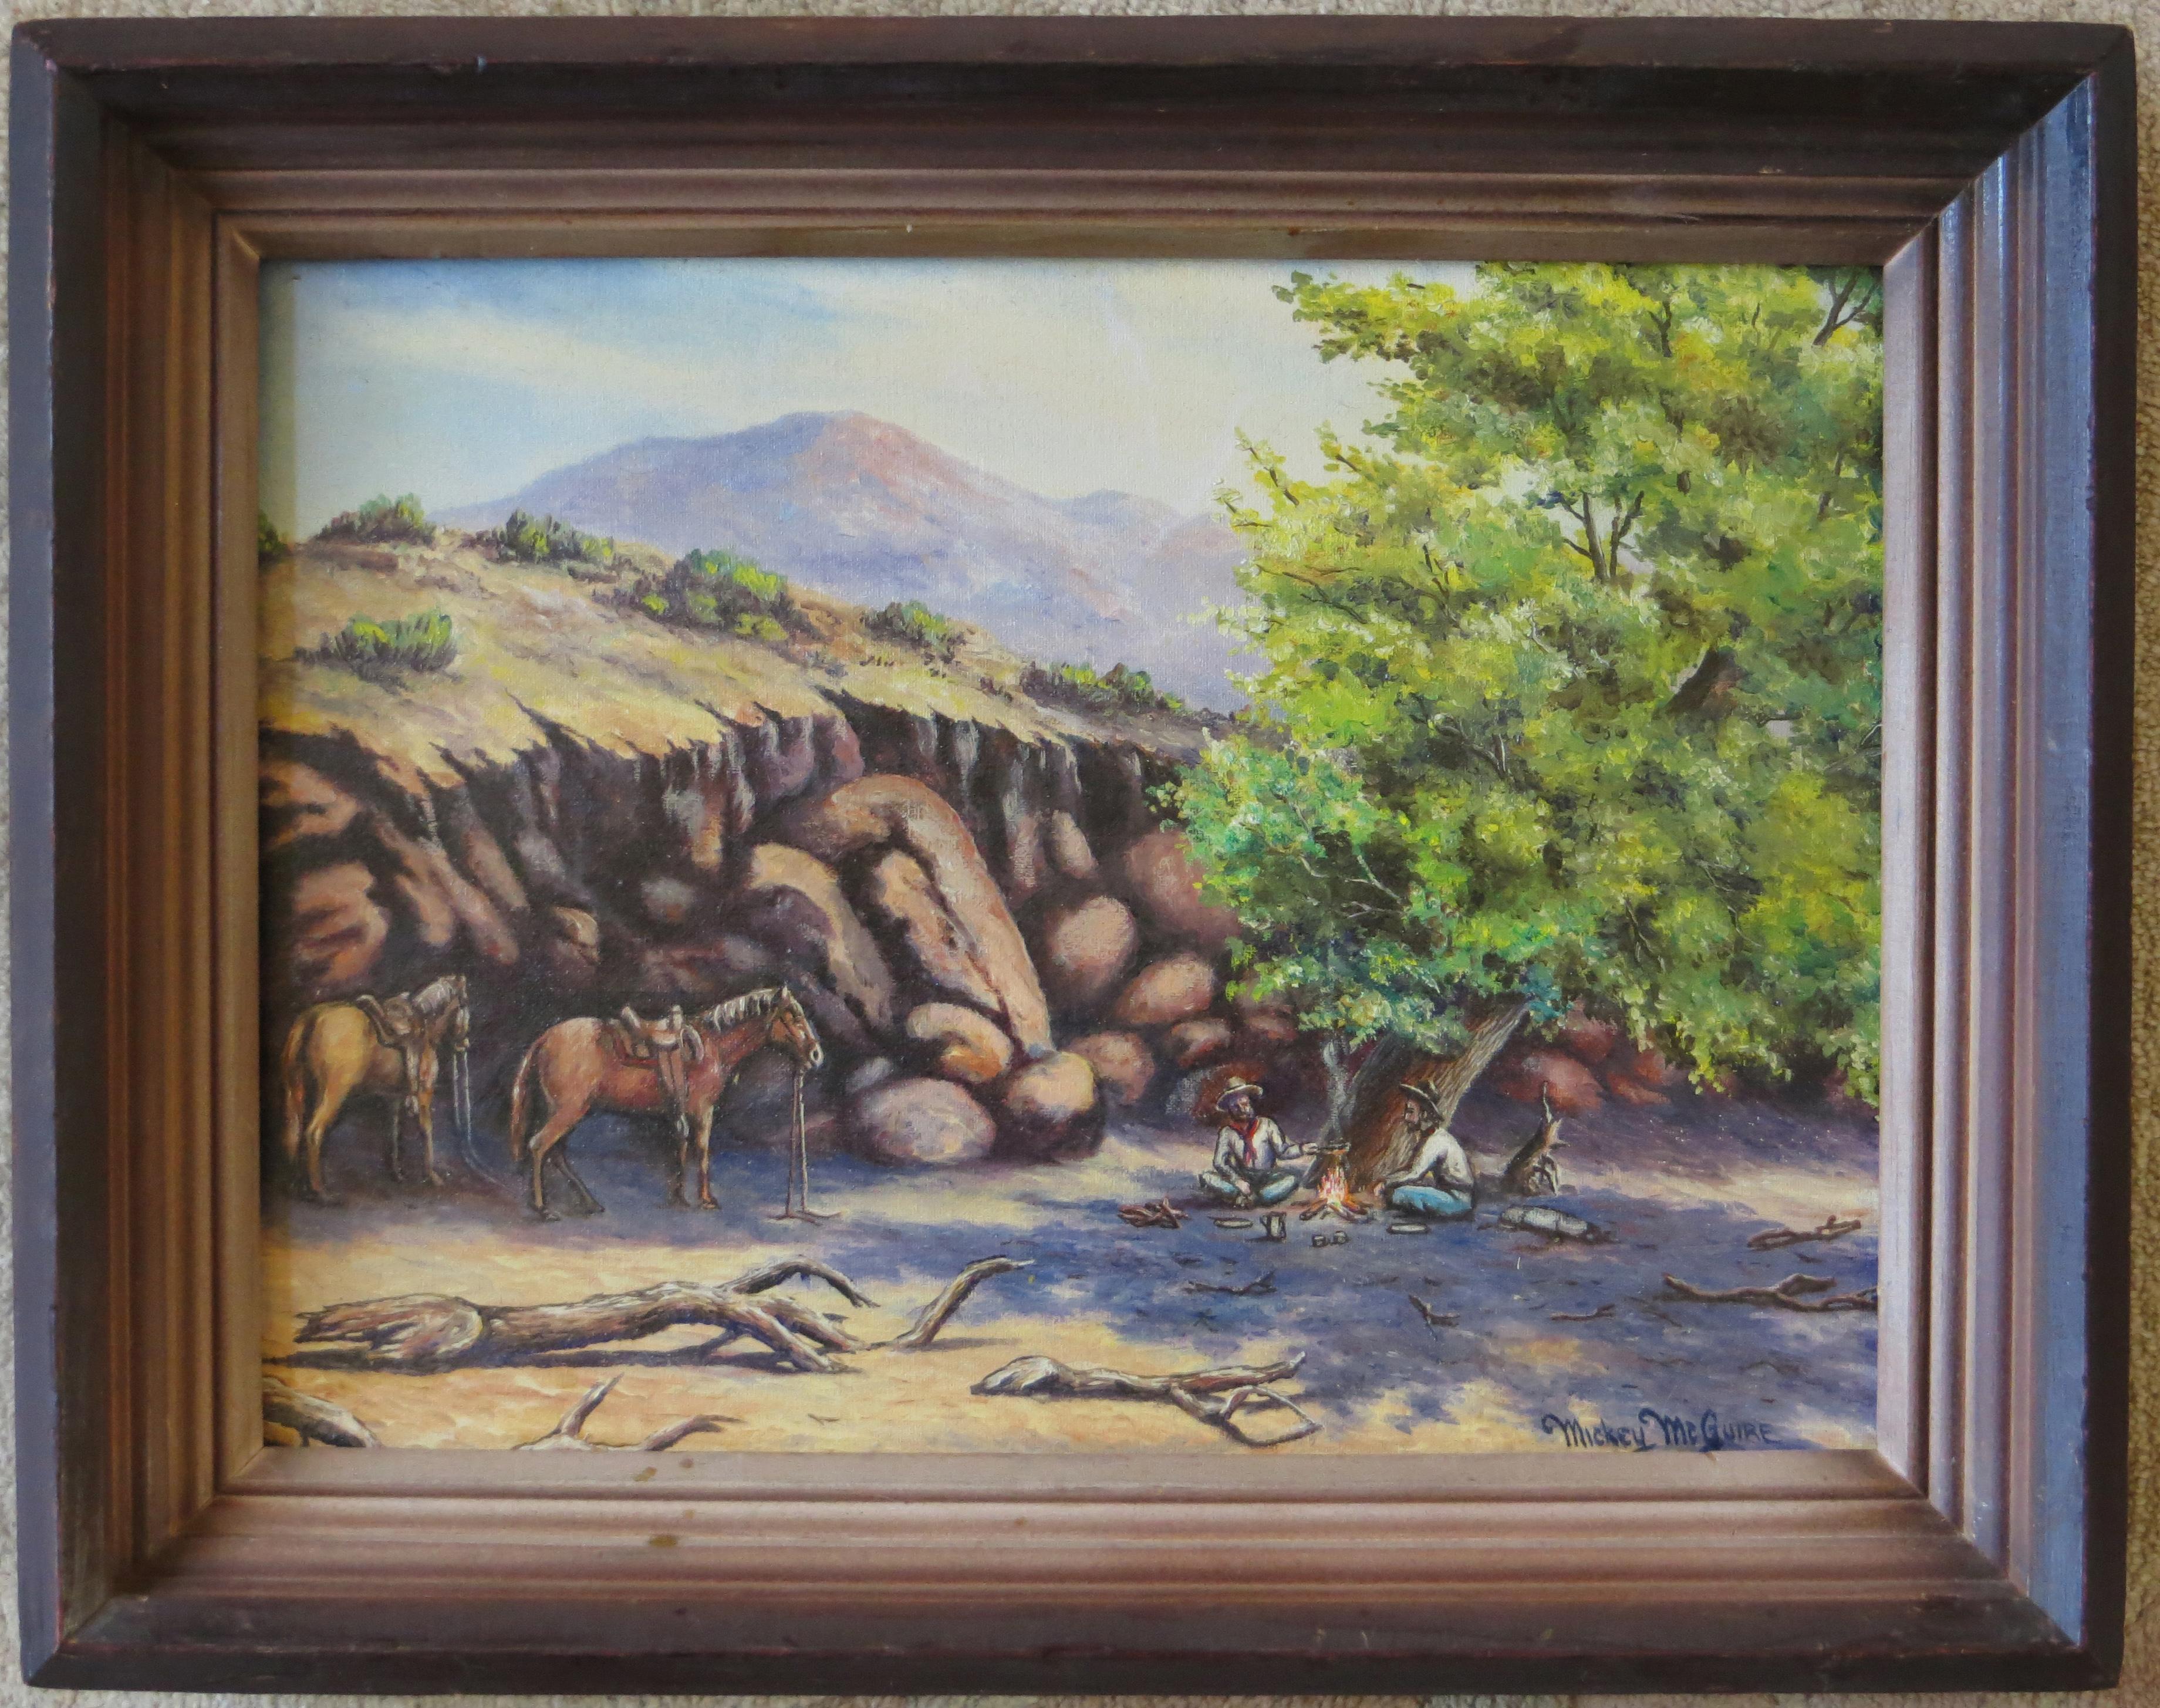 Mickey McGuire Landscape Painting - Untitled - Rustic Cowboy Painting